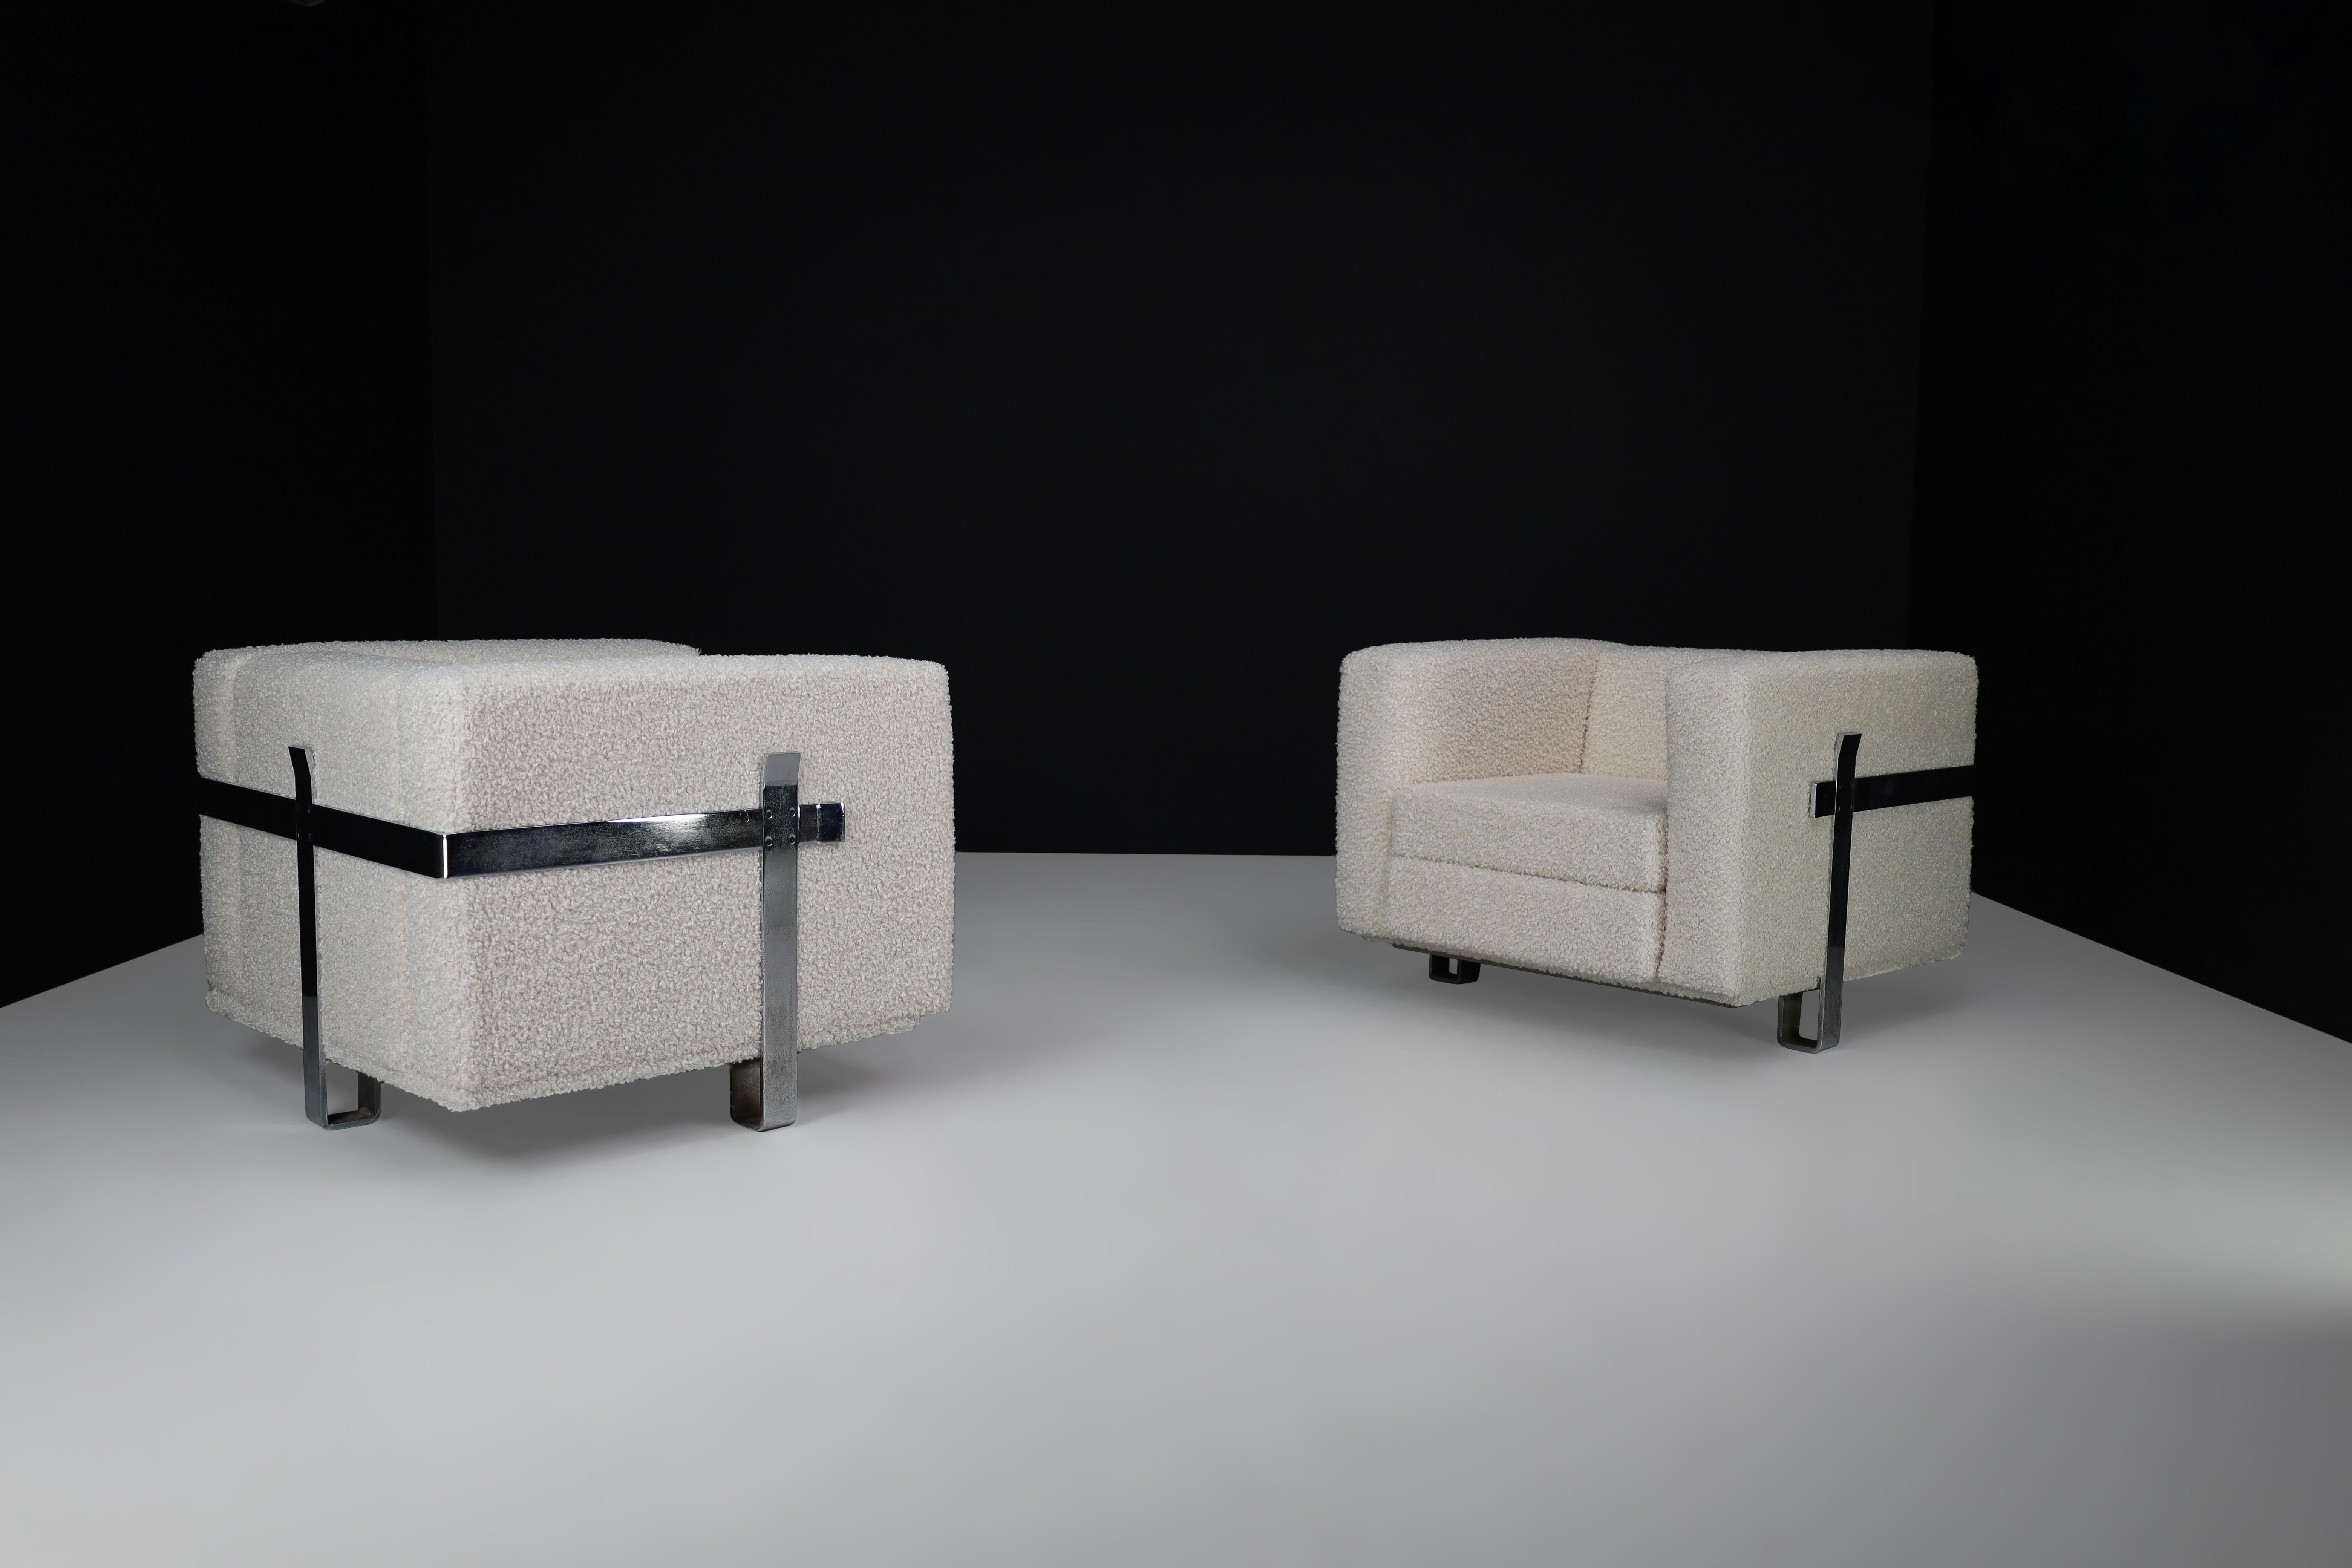 Mid-20th Century Midcentury Bouclé Lounge Chairs Designed by Luigi Caccia Dominioni for Azucena